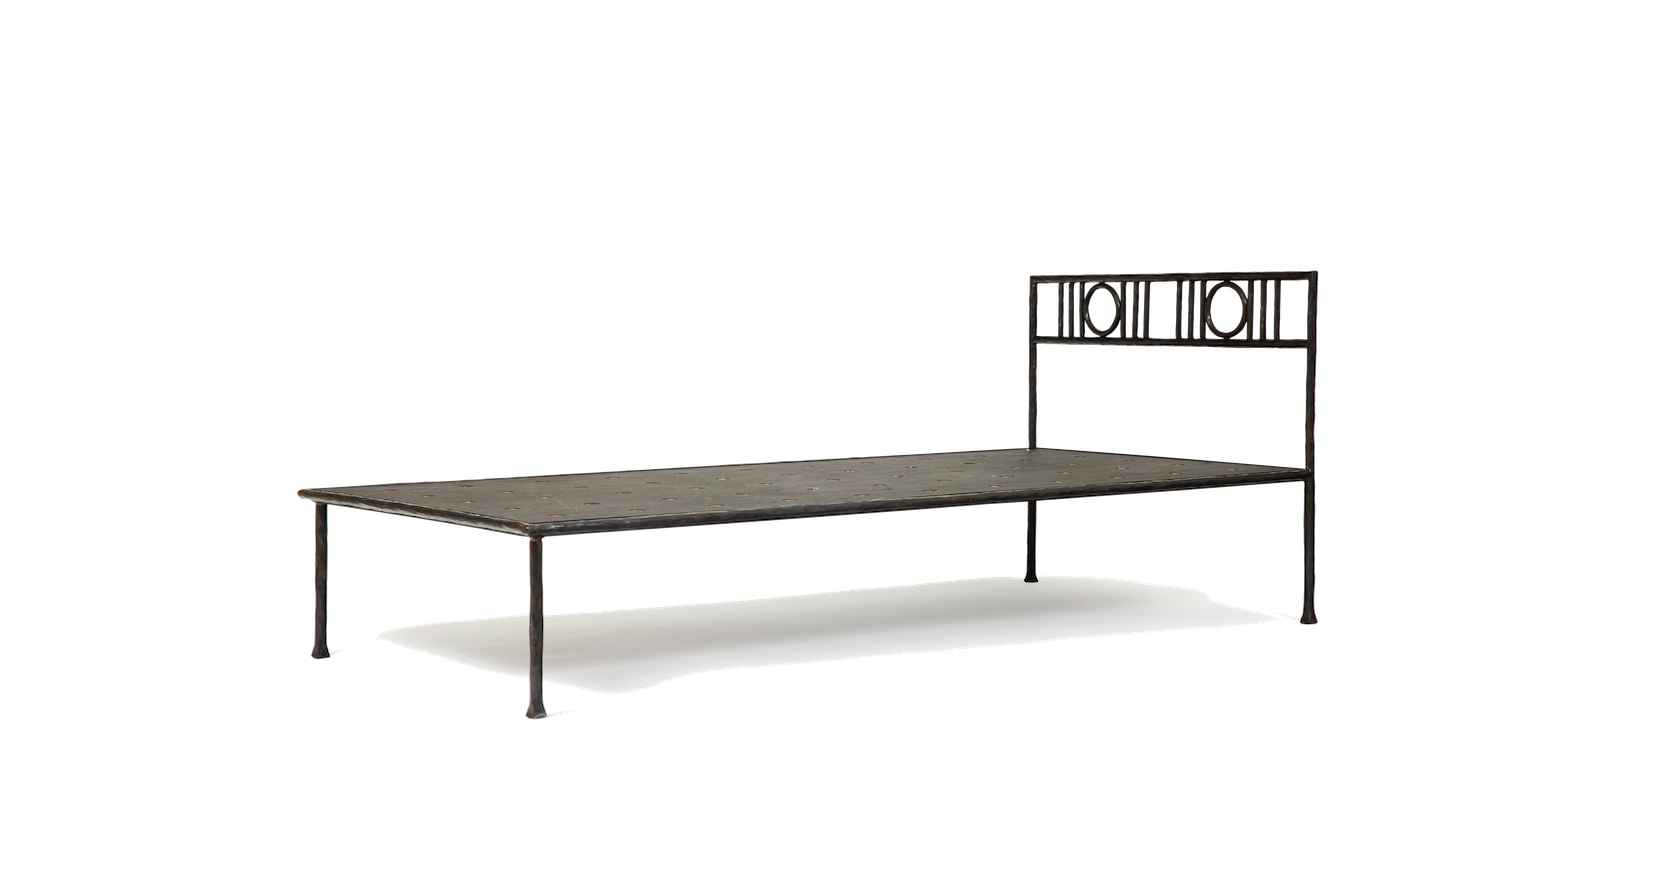 Garouste Bonetti, daybed one person in black wrought iron, bedhead with ornaments in the shape of circles and bars